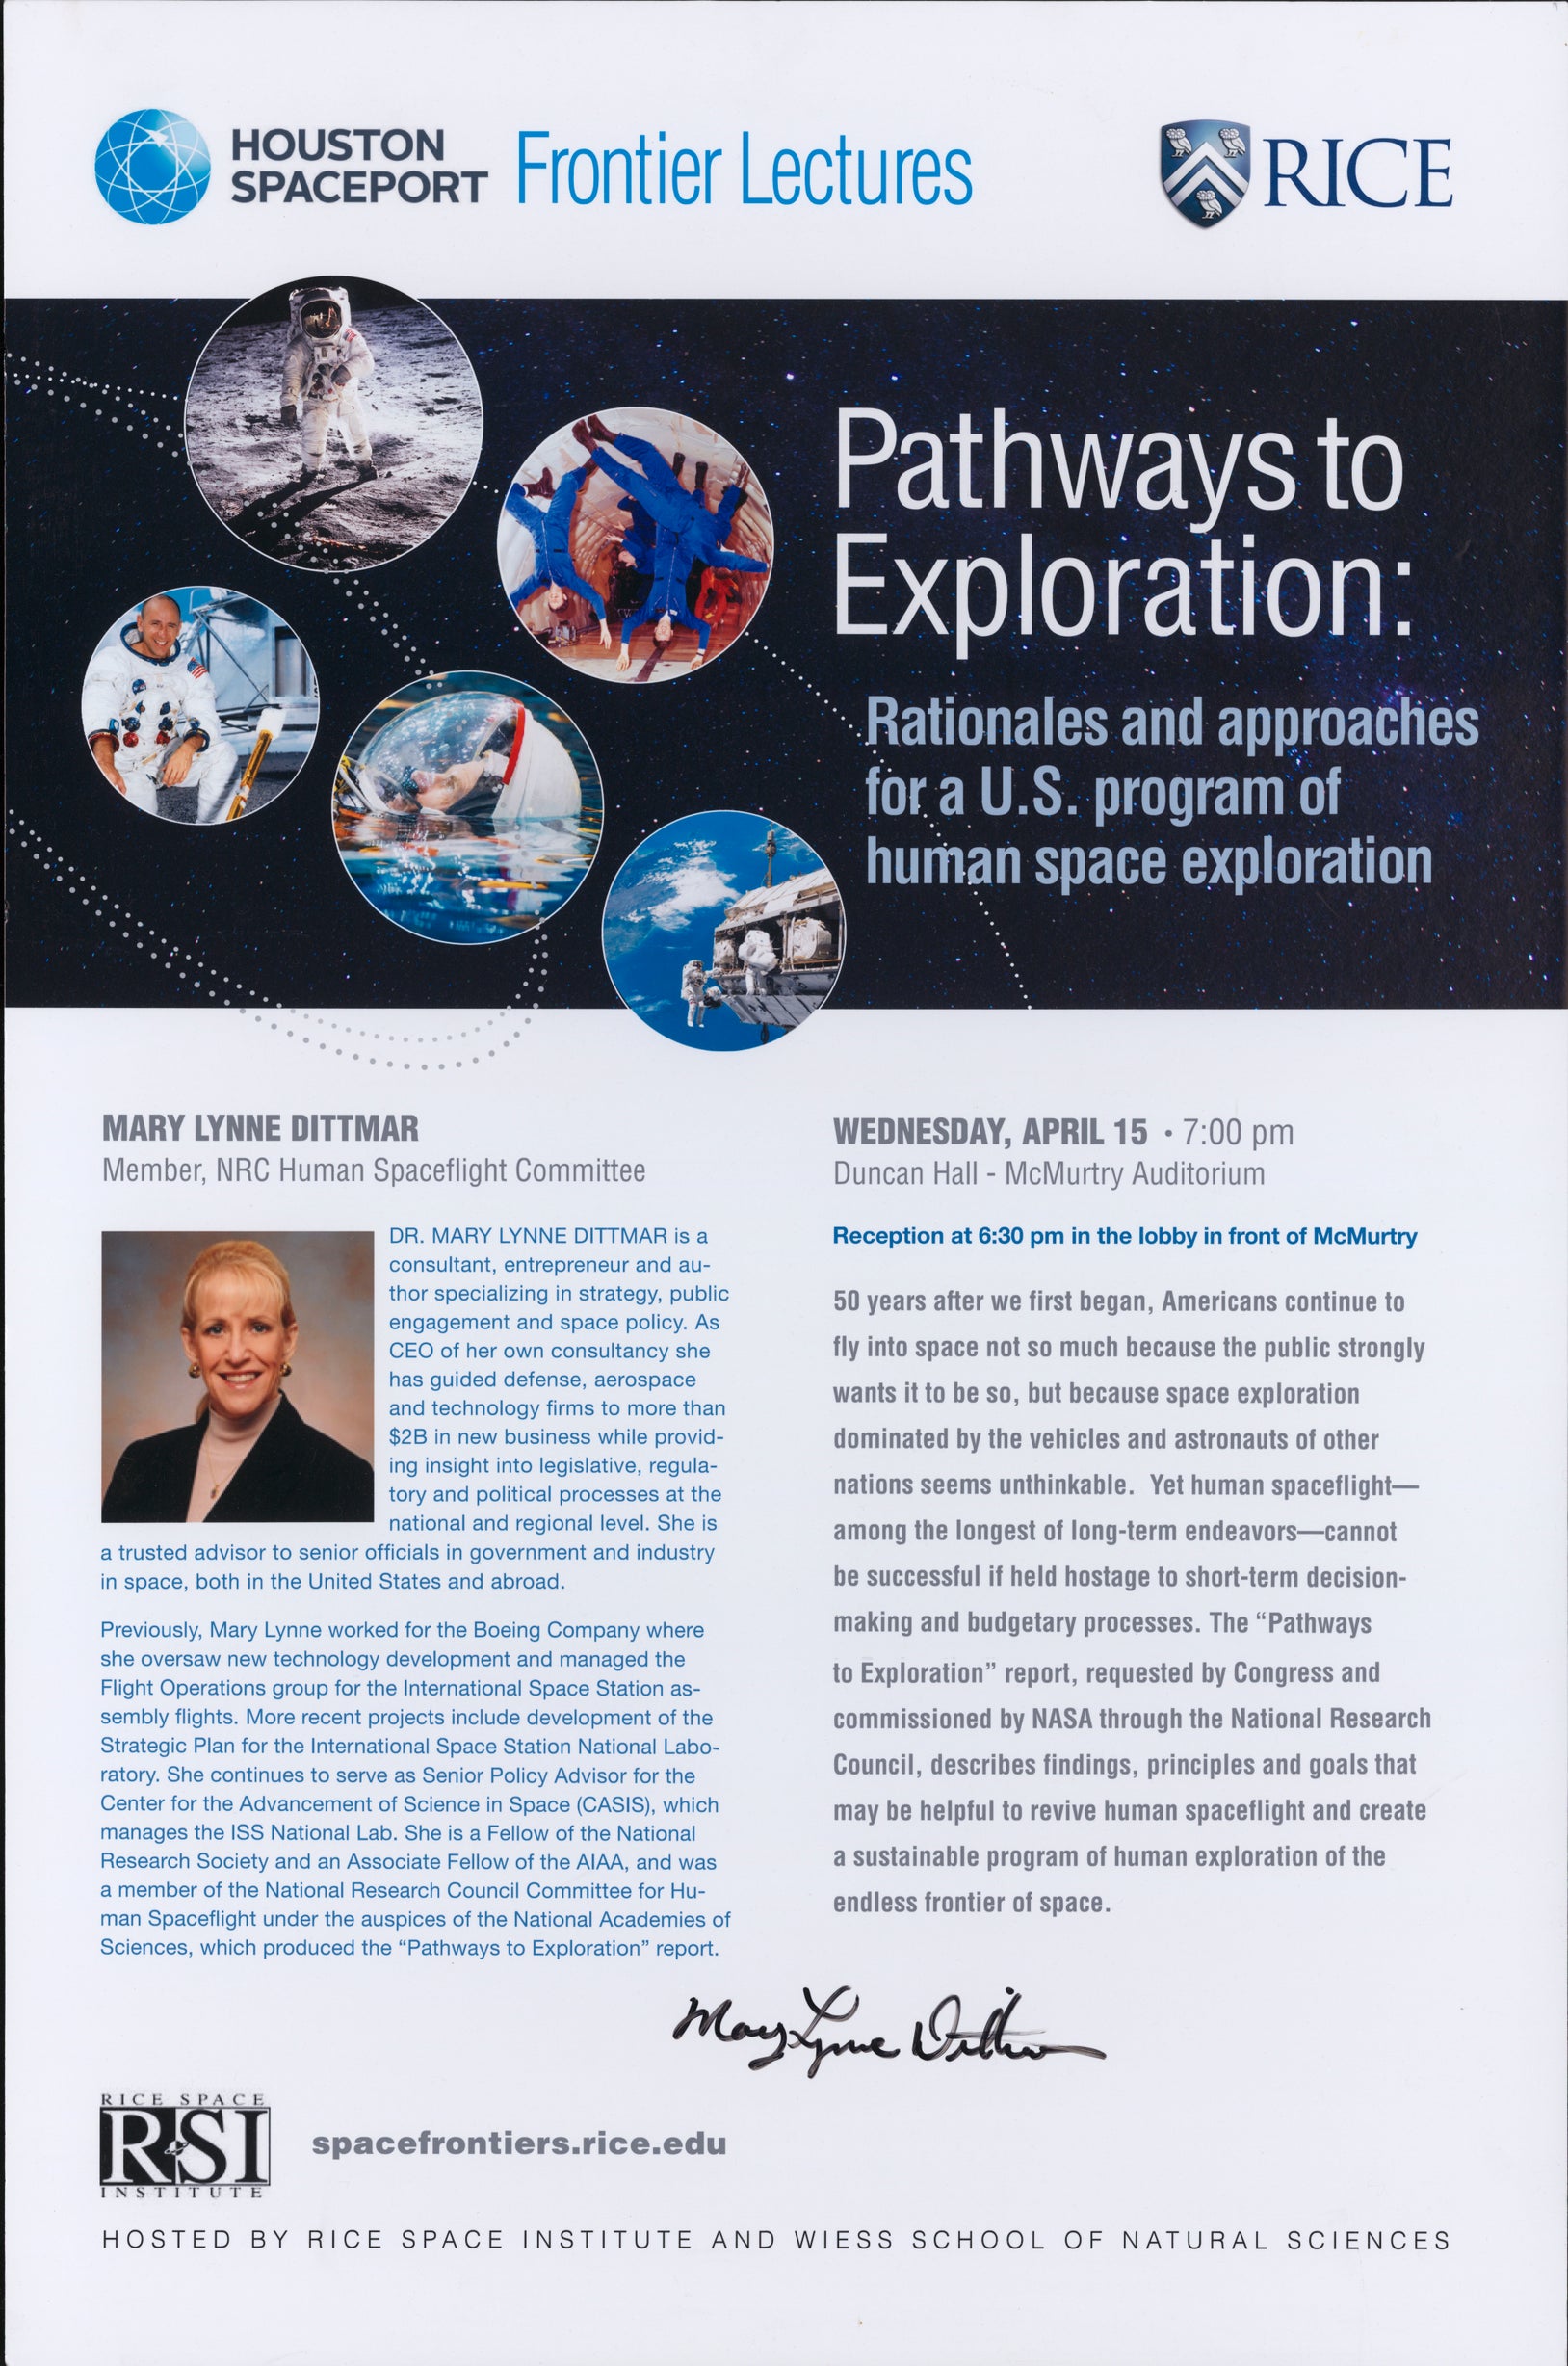 Poster of "Pathways to Exploration: Rationales and Approaches for a U.S. Program of Human Space Exploration" by Mary Lynne Dittmar